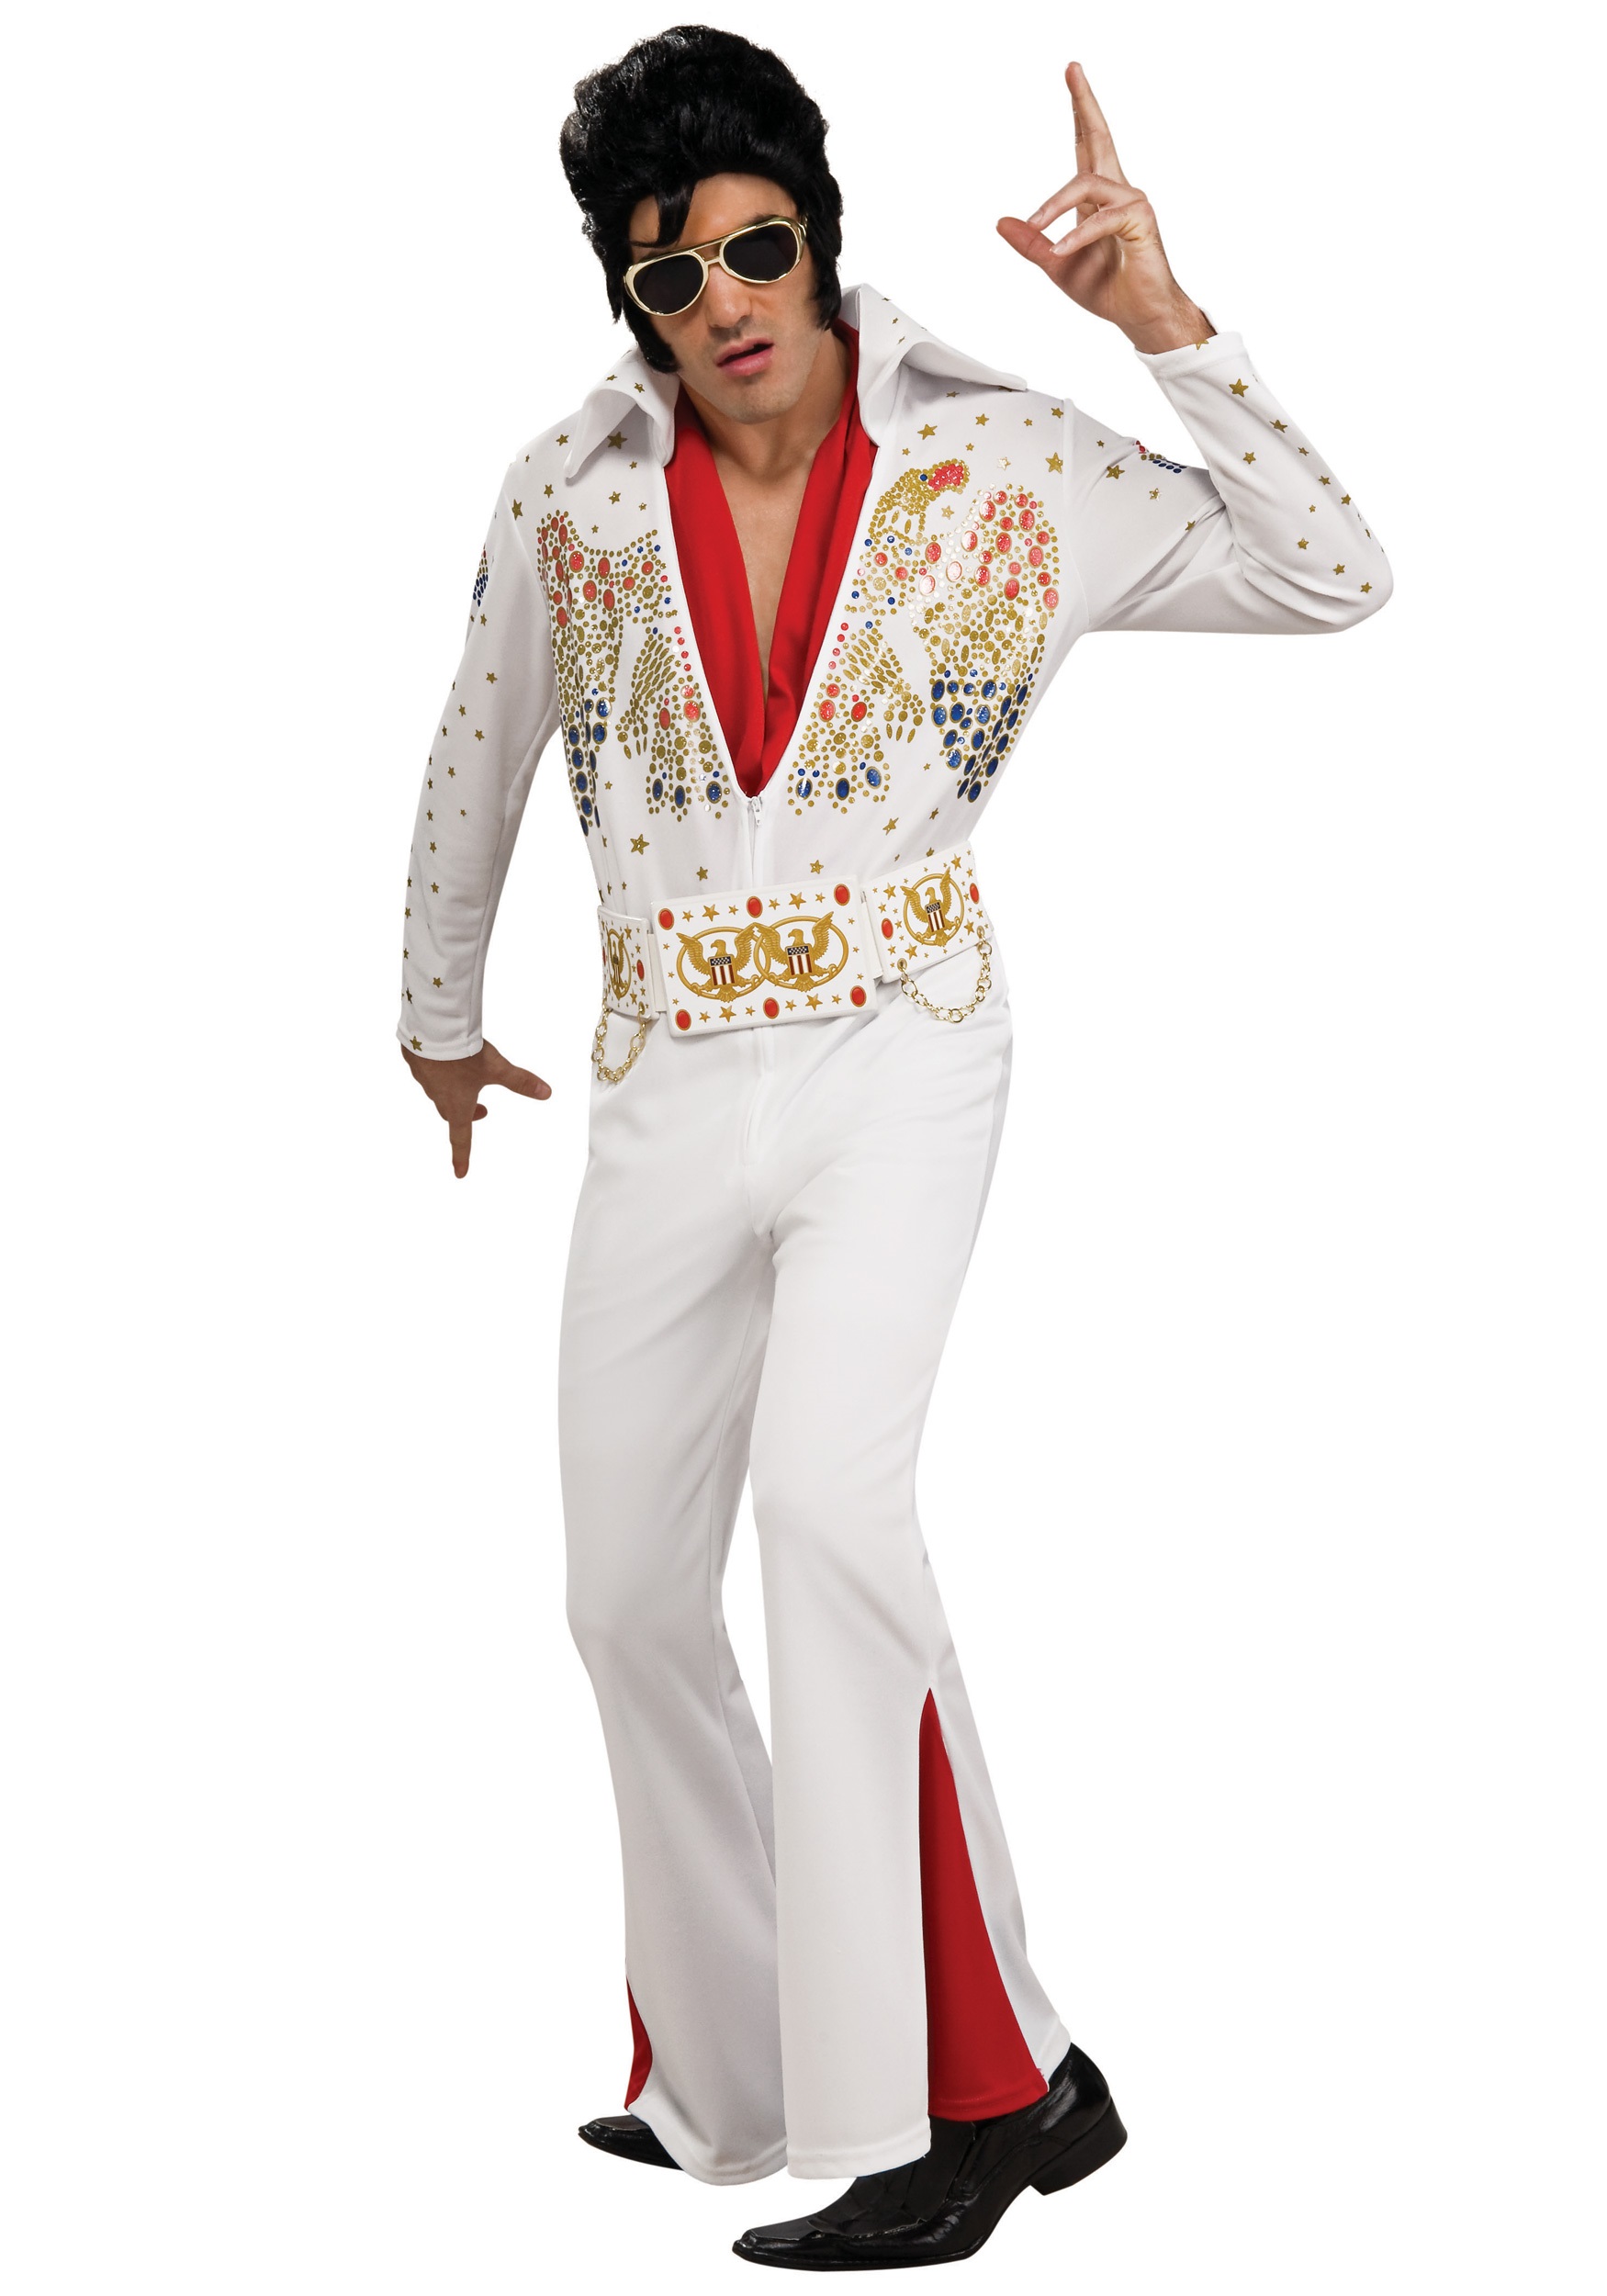 Image of Rubies Costume Co. Inc Adult Elvis Deluxe Jumpsuit Costume | Celebrity Costumes